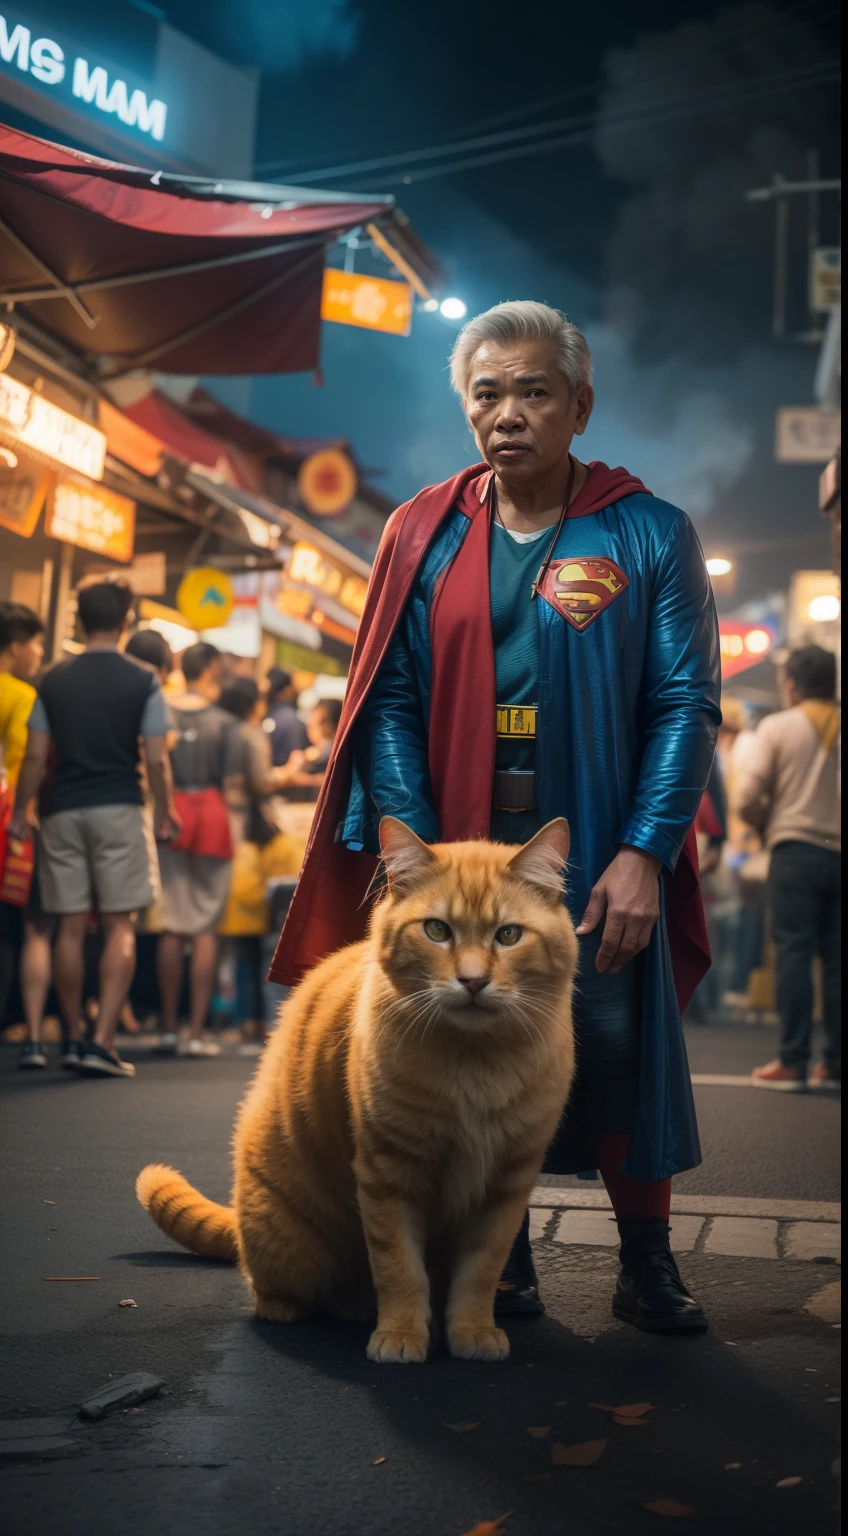 a 70 years old malay man in superman costume outfit standing in front of a bustling crowded night market holding a yellow big fluffy cat, night, serious face, nighttime, in superman movie style, hyper - realistic photography, dramatic effect, smoke effect in background, dark color grading, full body, 8k, close - up shot, extreme close - up photo